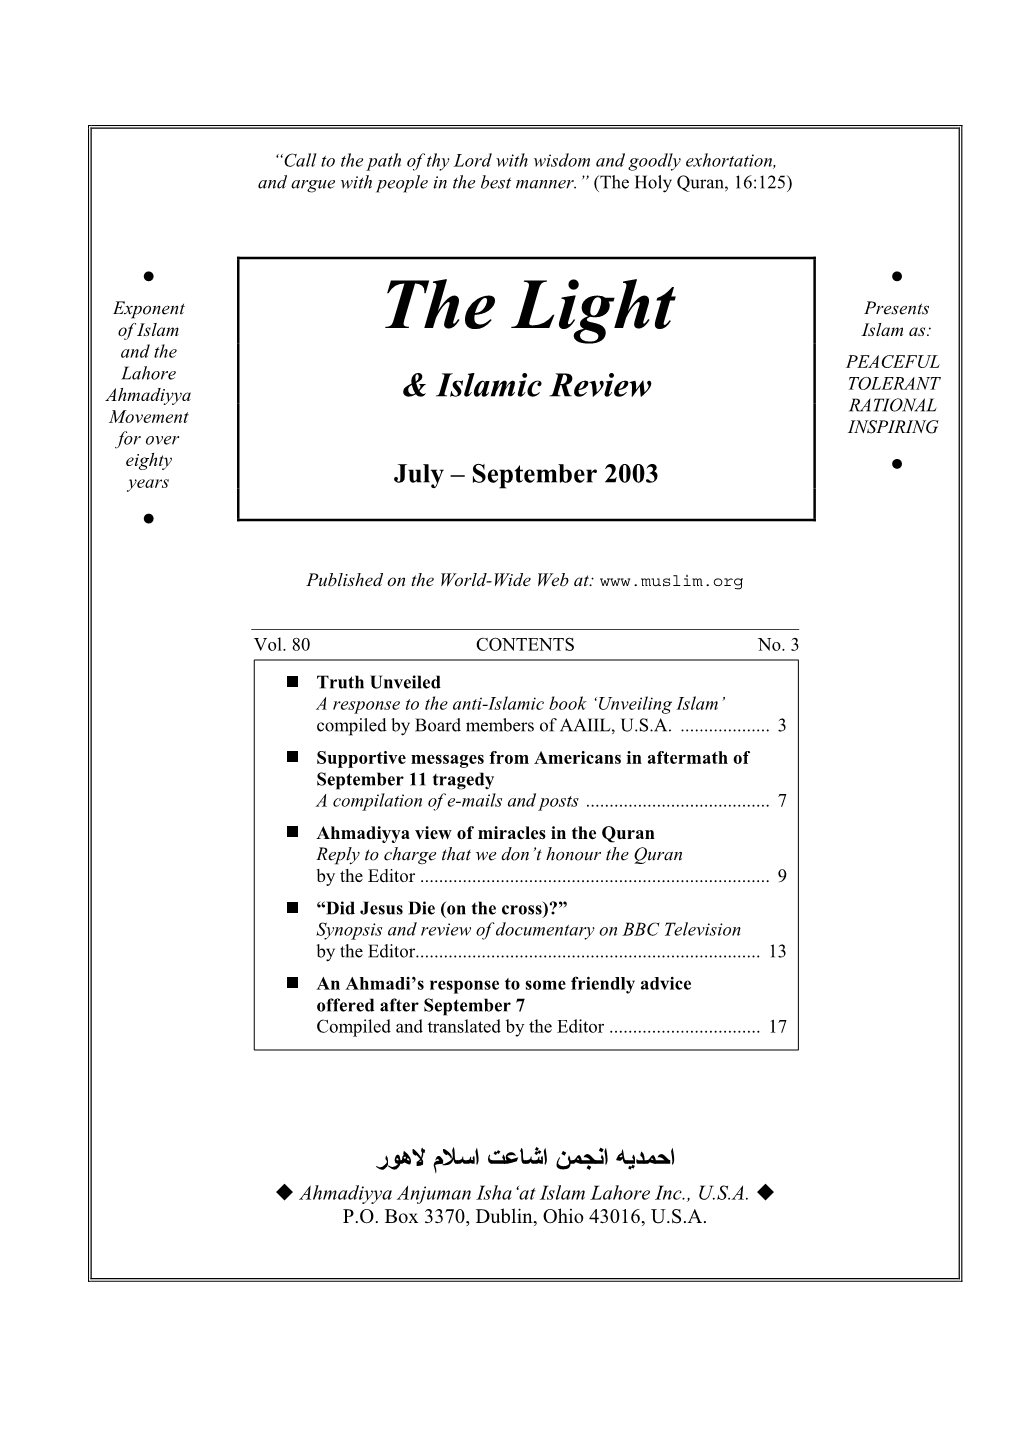 The Light Islam As: and the PEACEFUL Lahore TOLERANT Ahmadiyya & Islamic Review RATIONAL Movement INSPIRING for Over Eighty • Years July – September 2003 •